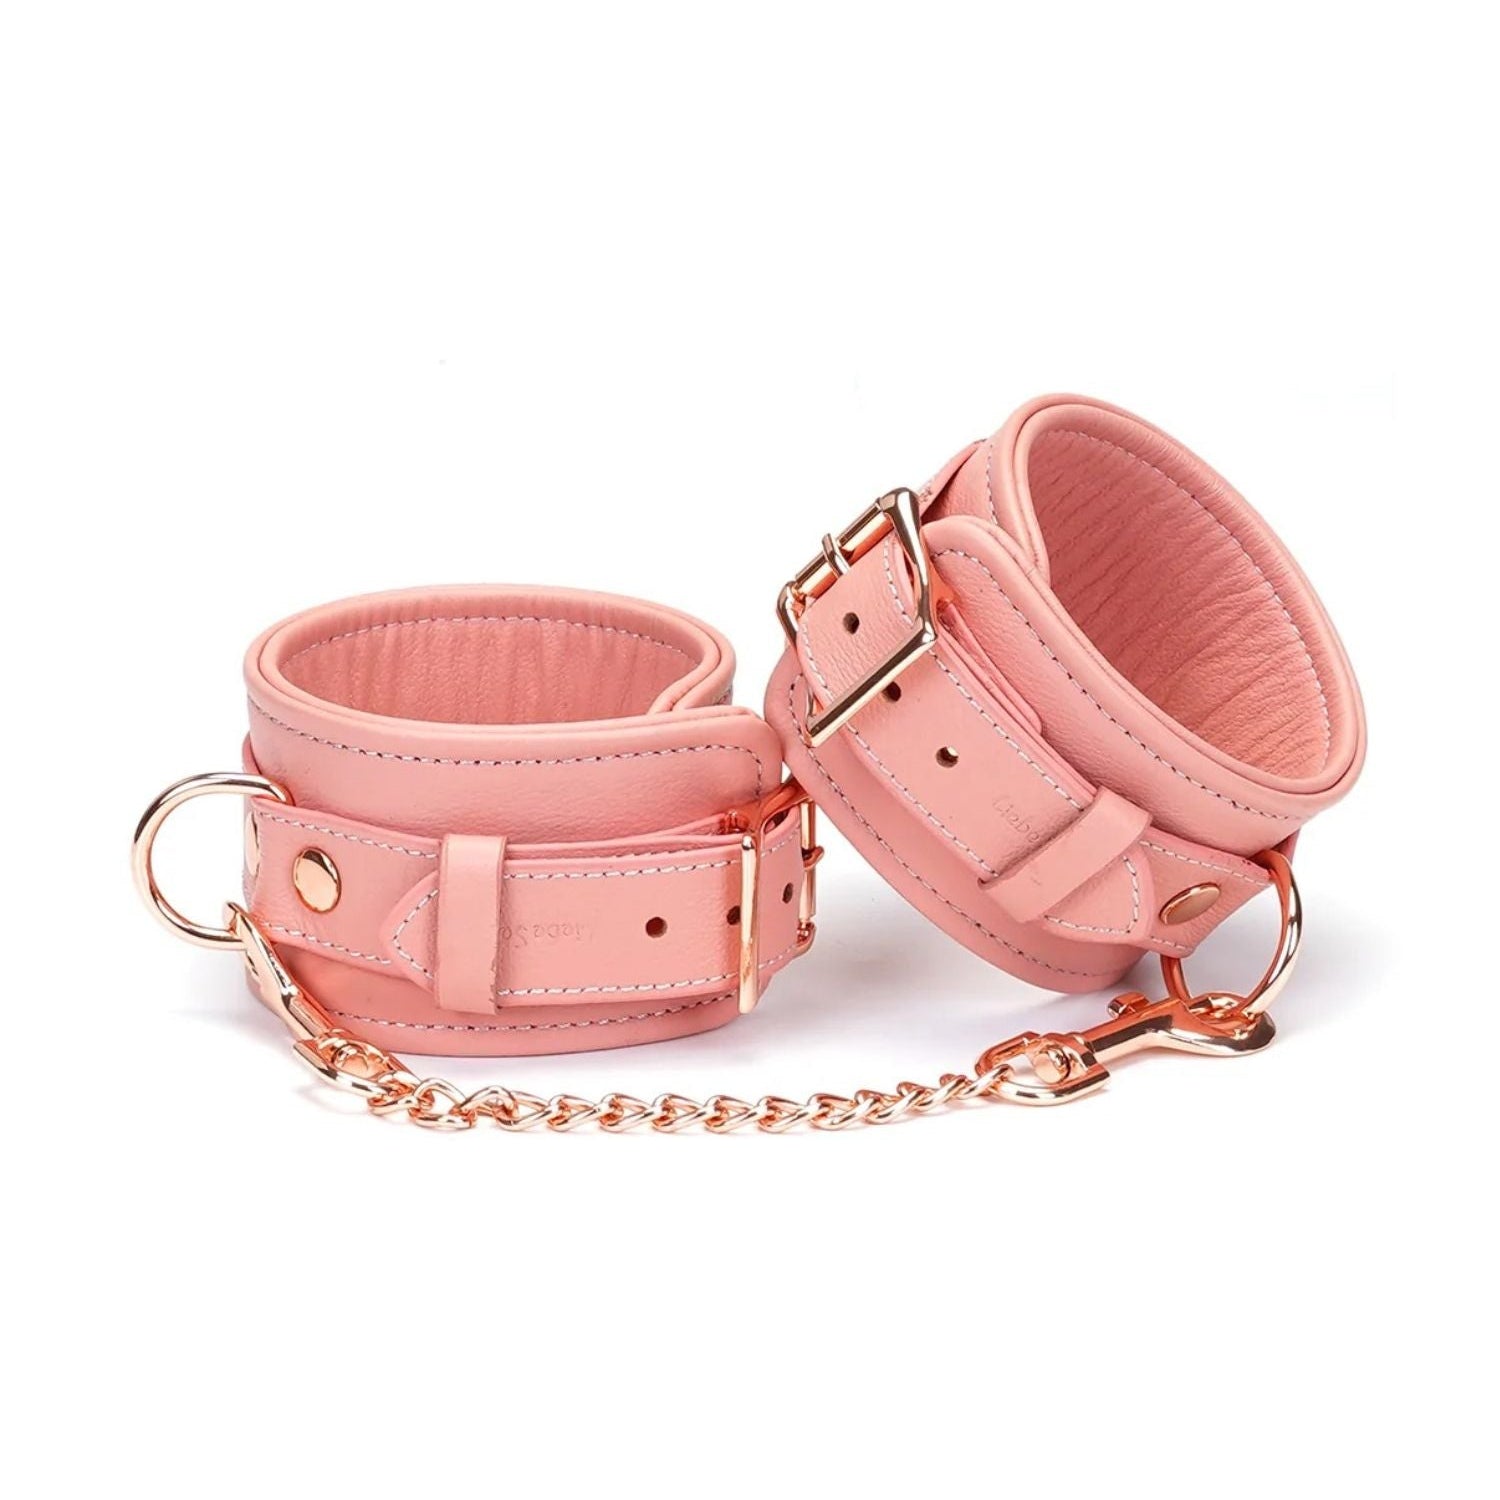 Liebe Seele Pink Dream Leather Cuffs | Avec Amour Lingerie